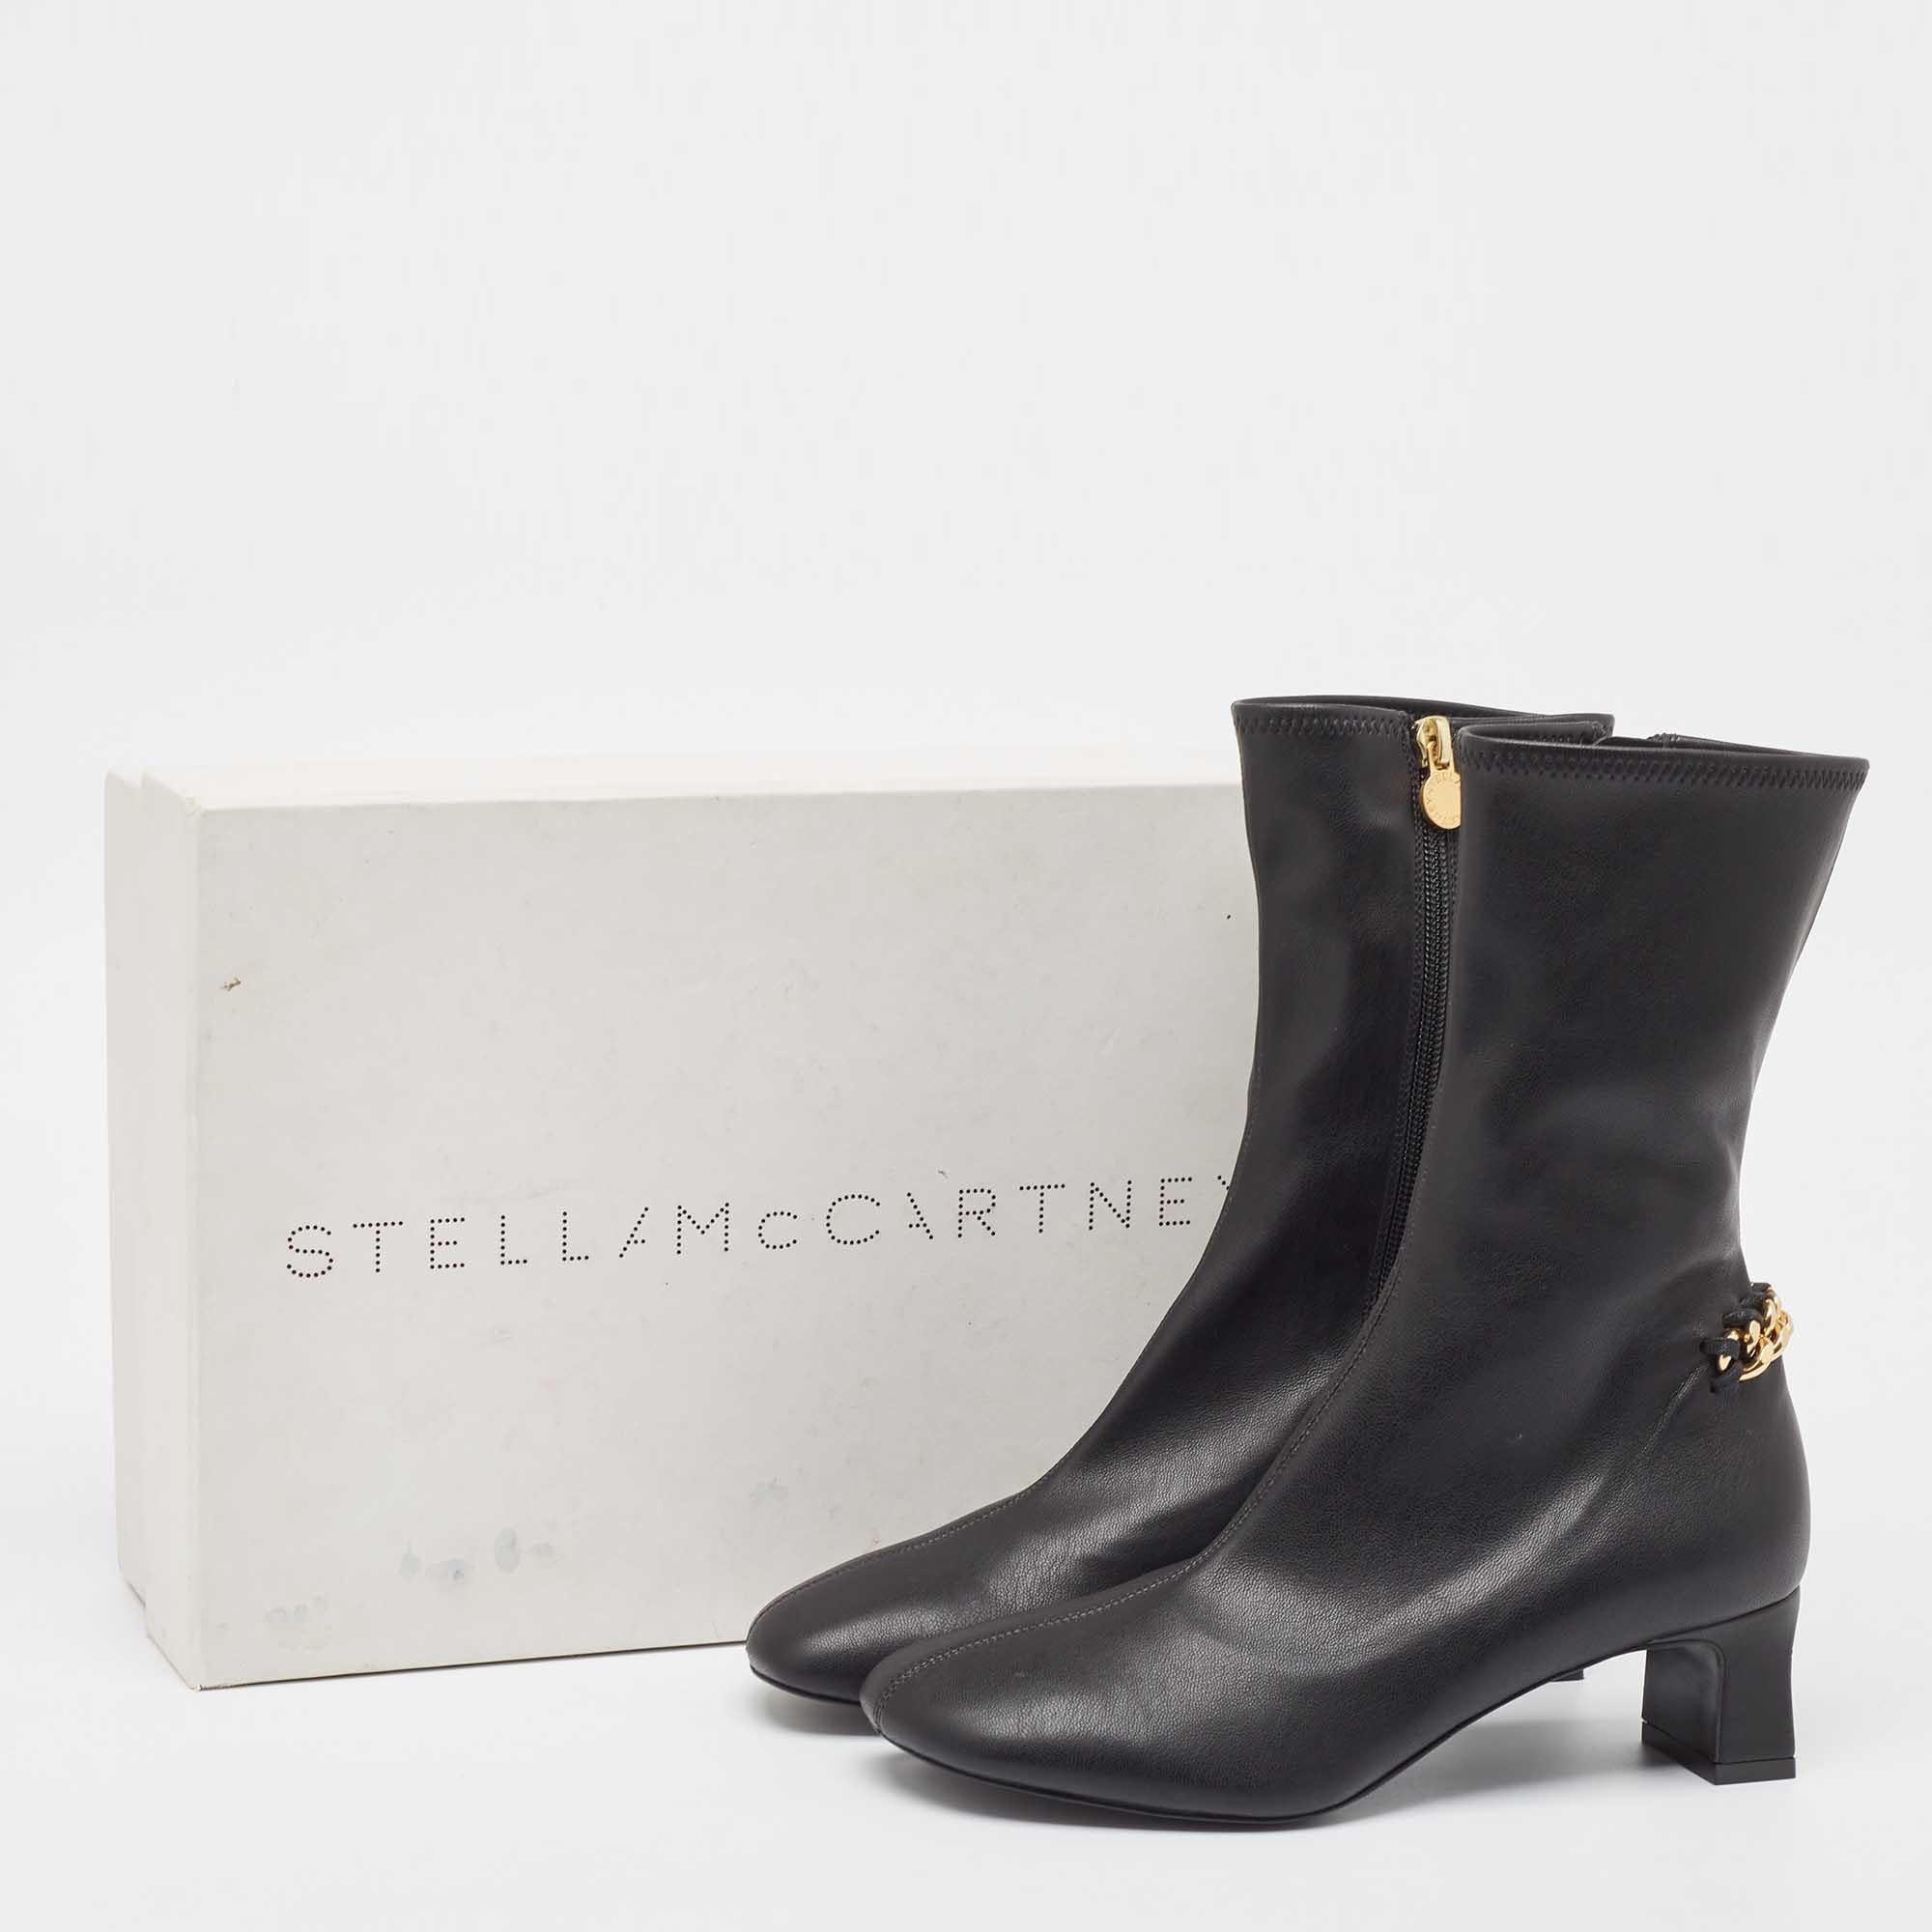 Stella McCartney Black Faux Leather Falabella Stretch Ankle Boots Size 36 For Sale 5